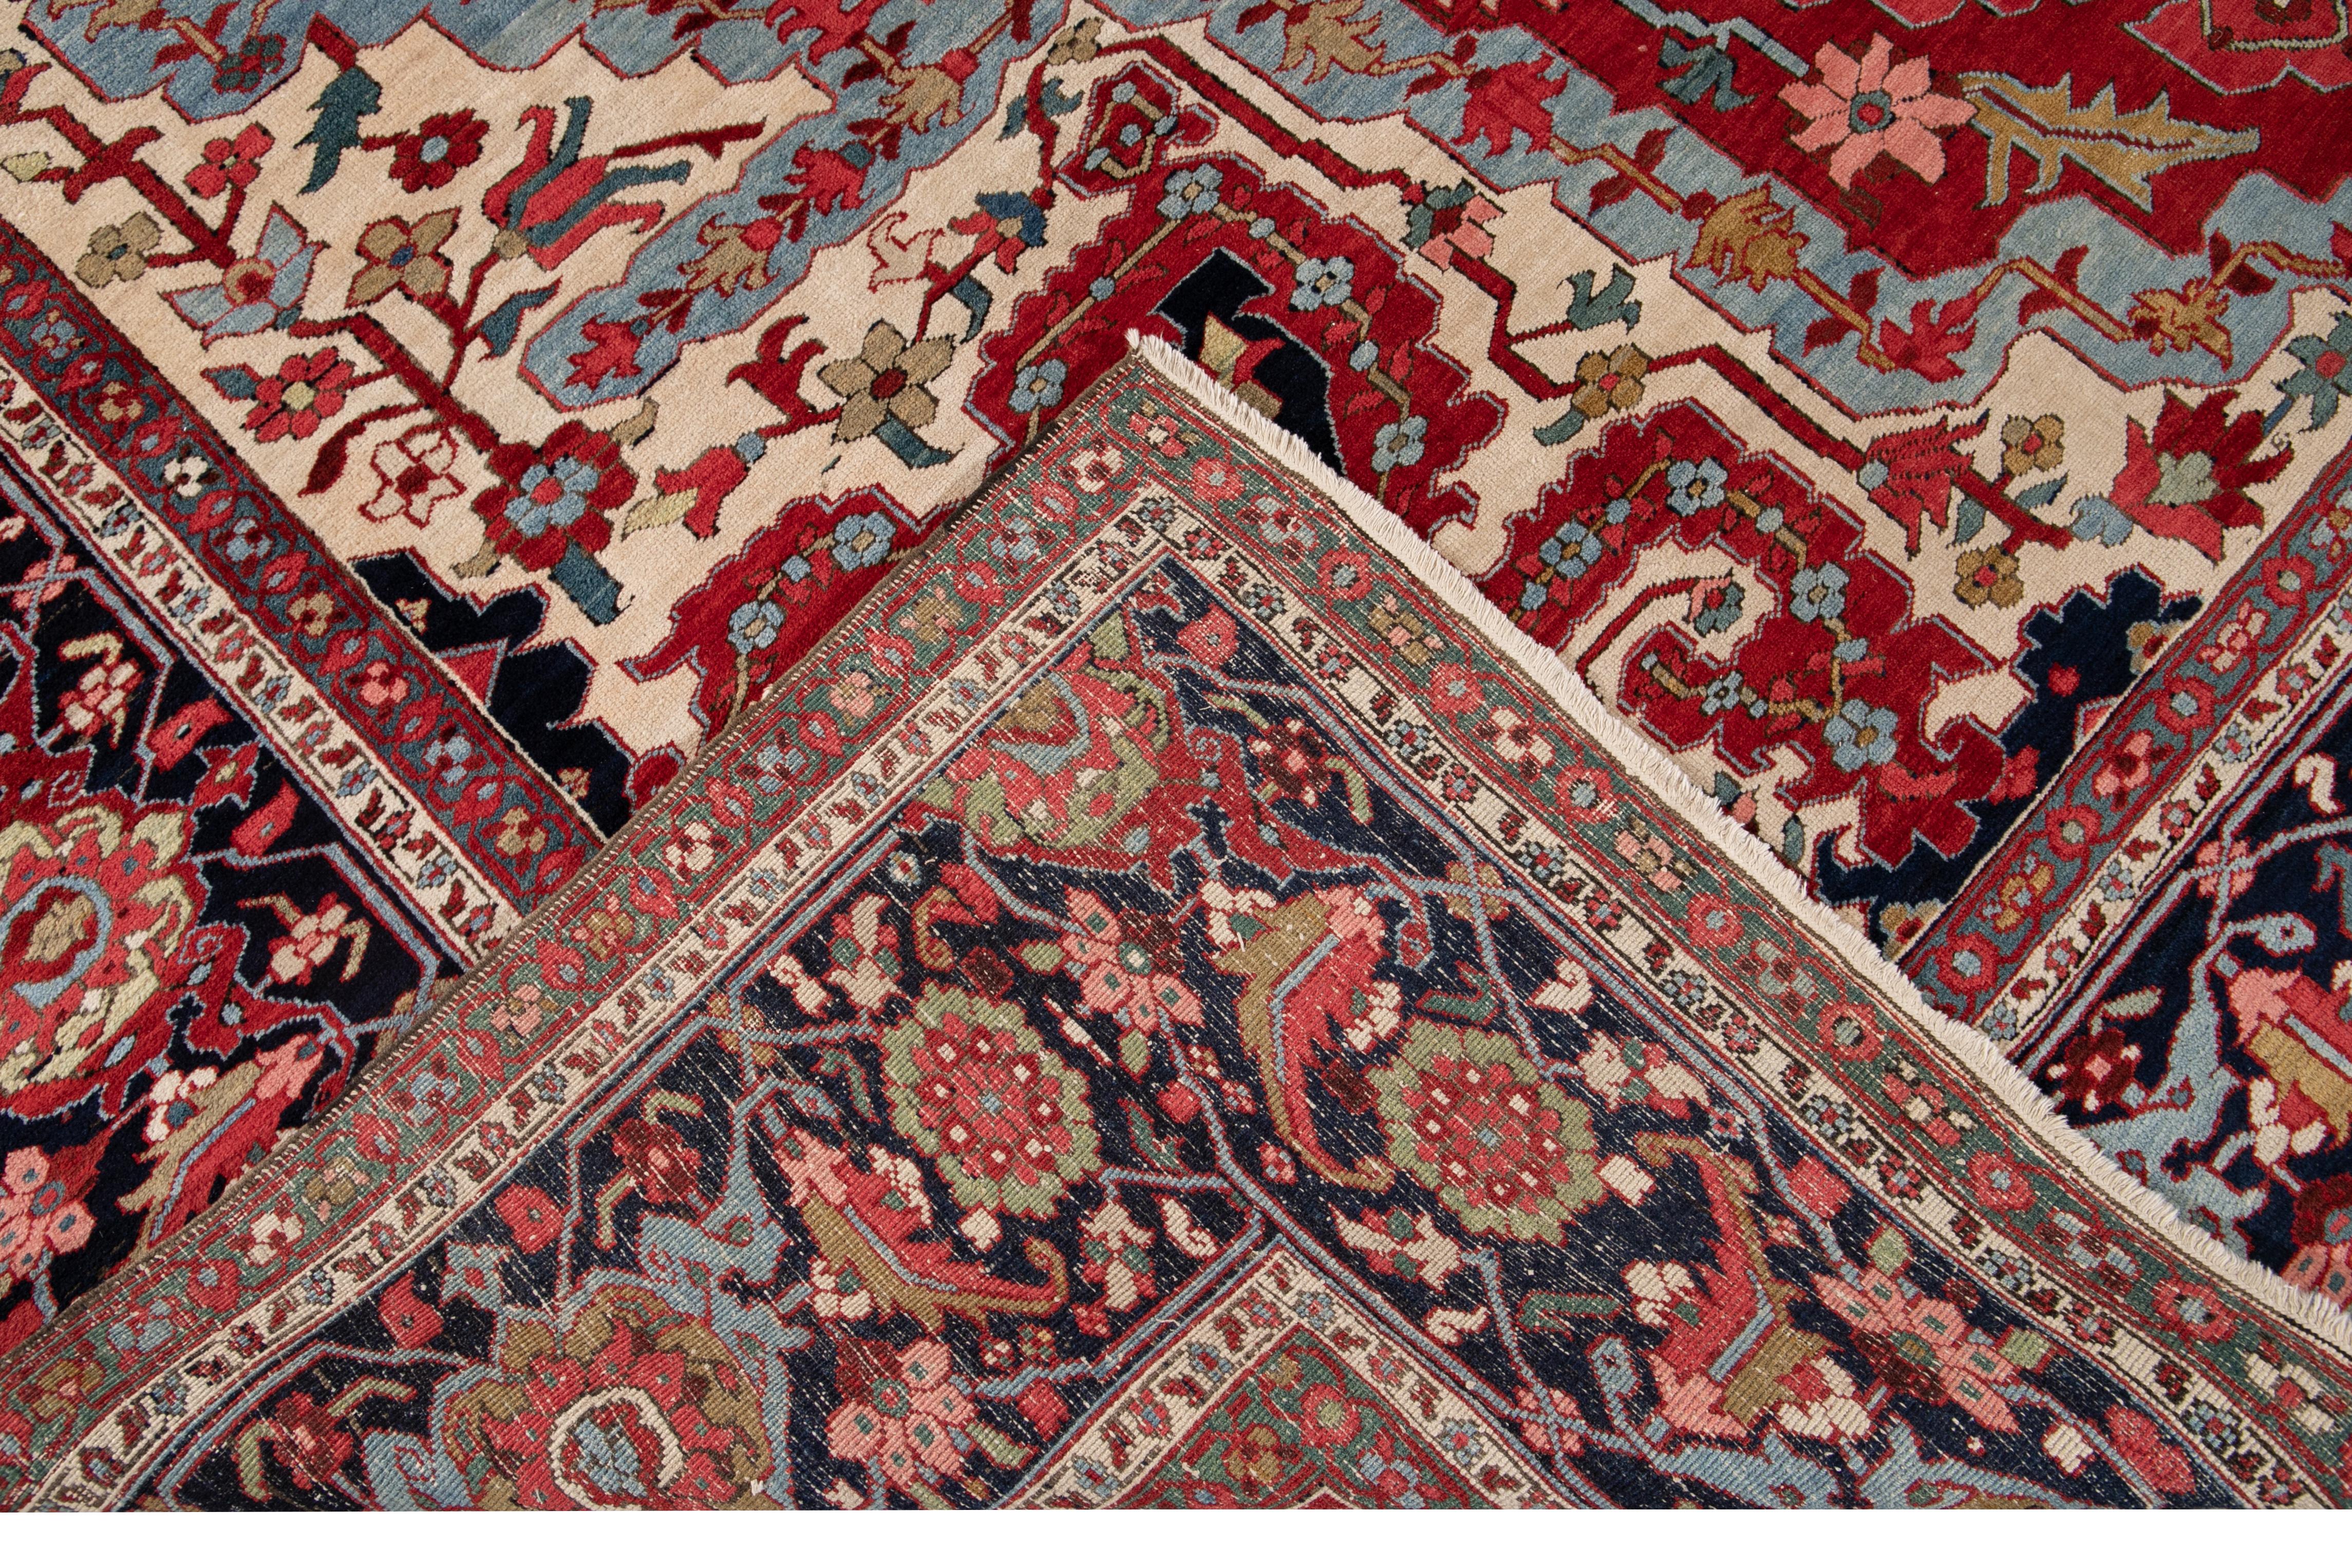 Beautiful antique oversize Serapi hand knotted wool rug with a red field. This Serapi rug has a navy-blue frame and multi-color accents with a center medallion floral design,

circa 1890.

This rug measures 12' x 20'.